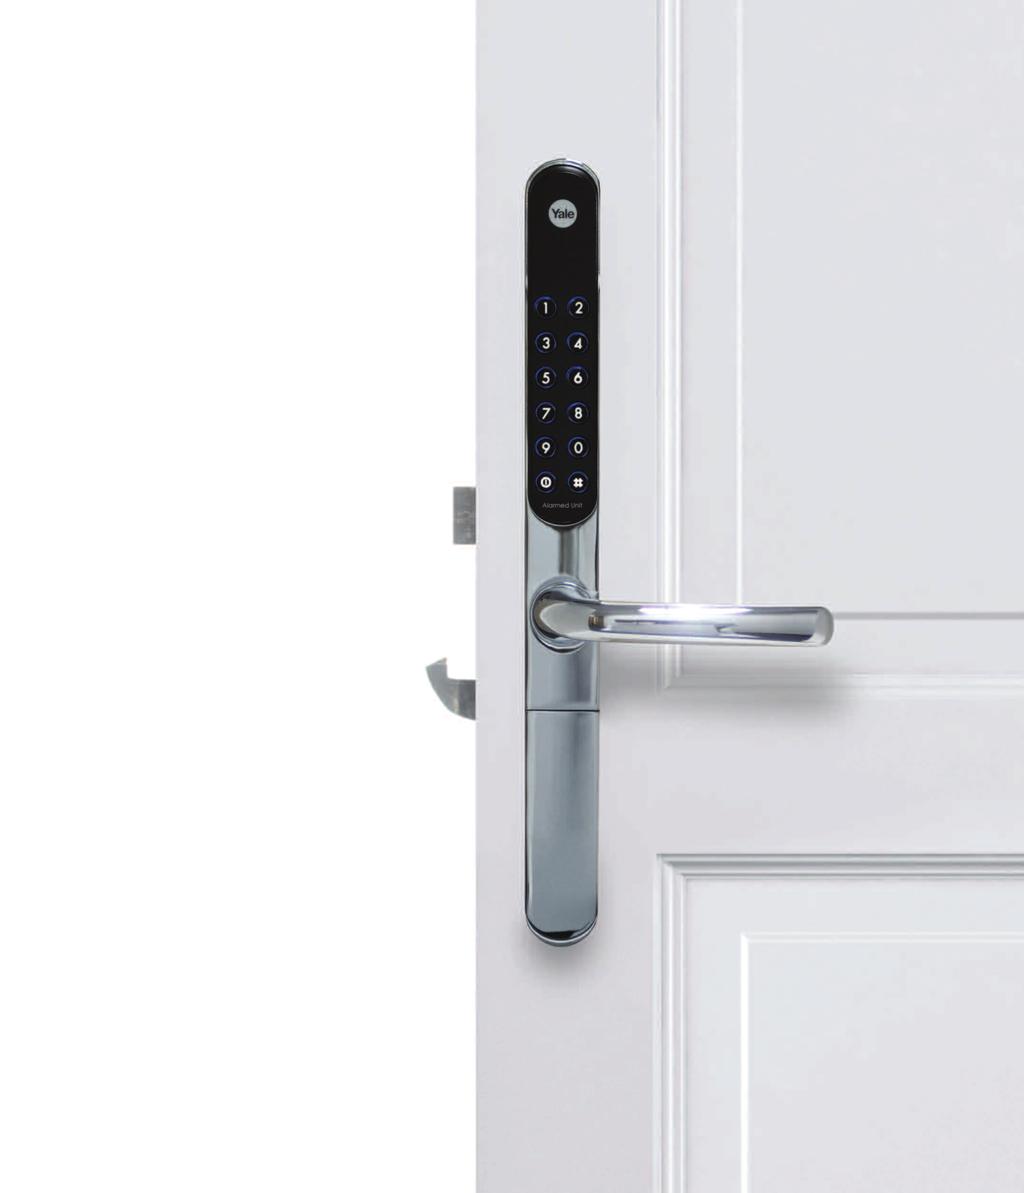 Multipoint locking PC Henderson are working in partnership with Yale to offer a durable multipoint lock which is recommended for